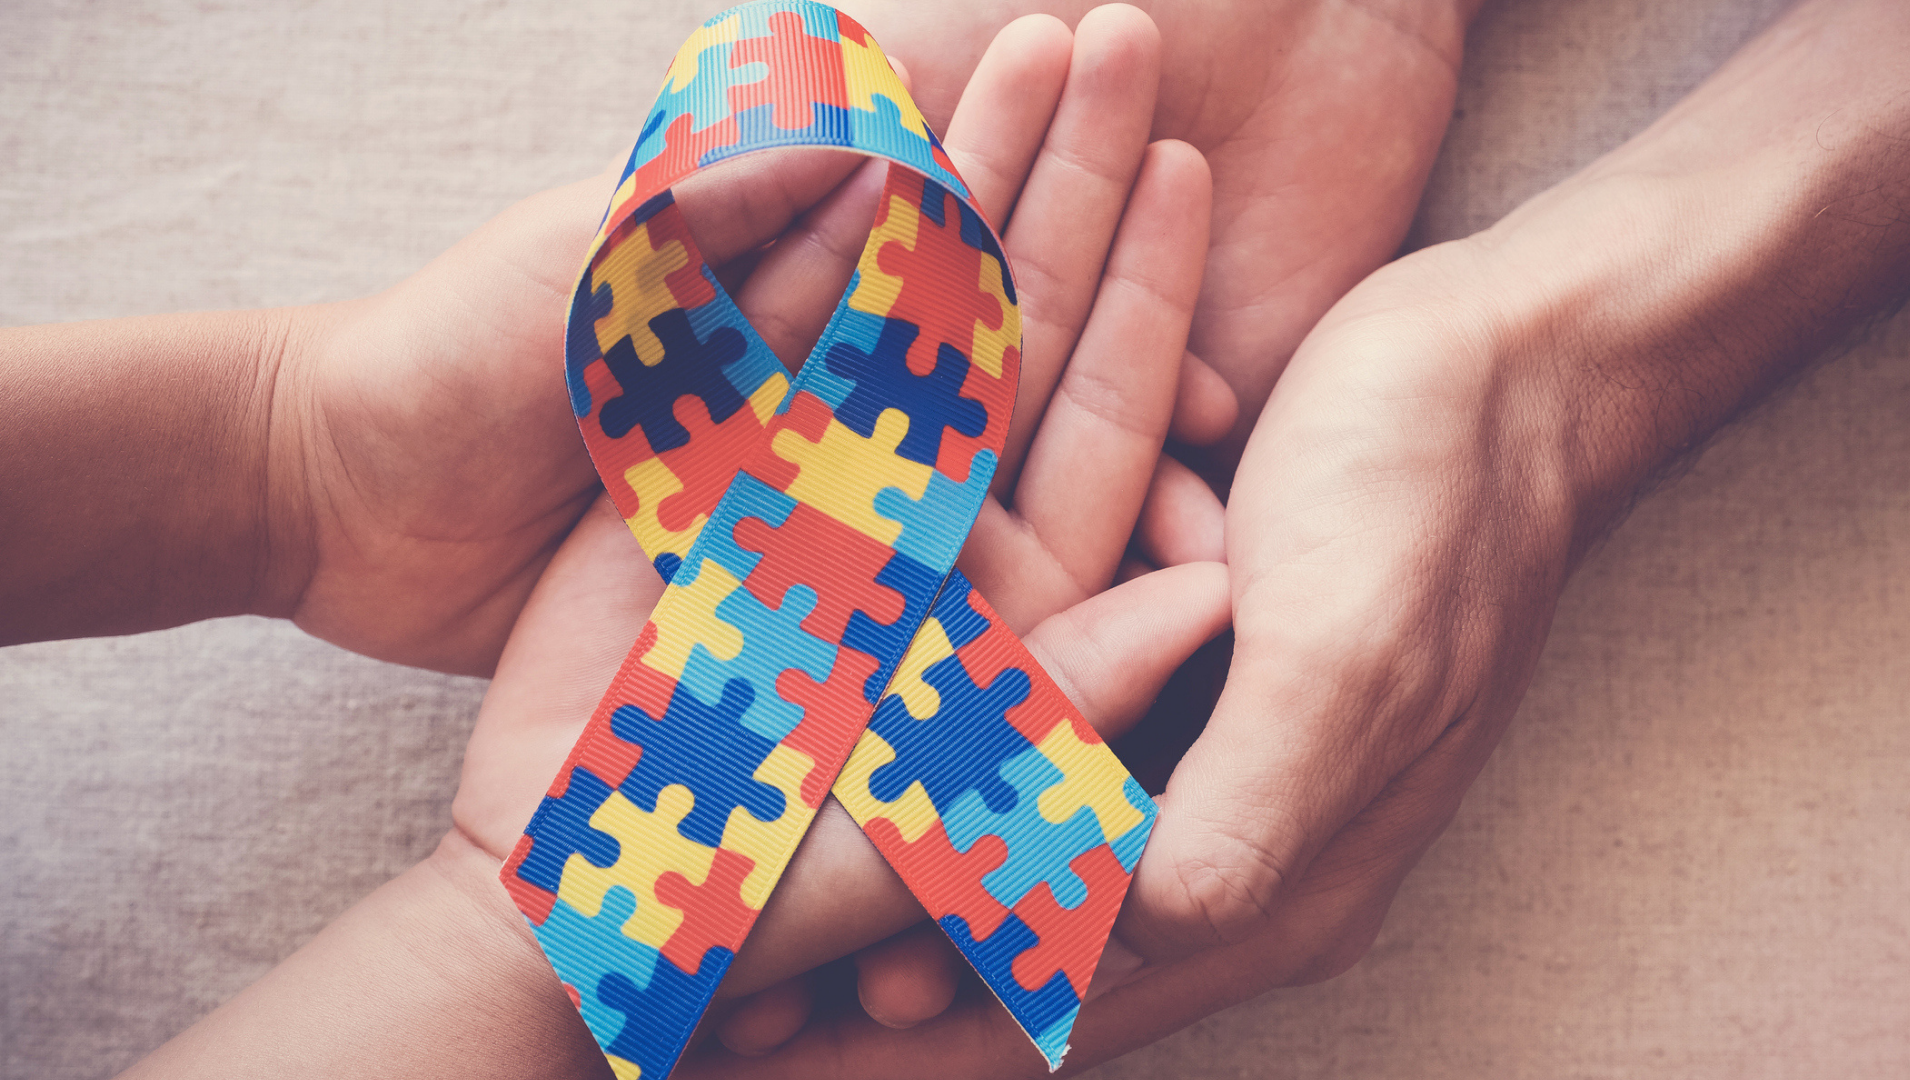 A pair of hands framing the autism awareness ribbon, coloured with orange, dark blue and teal puzzle pieces